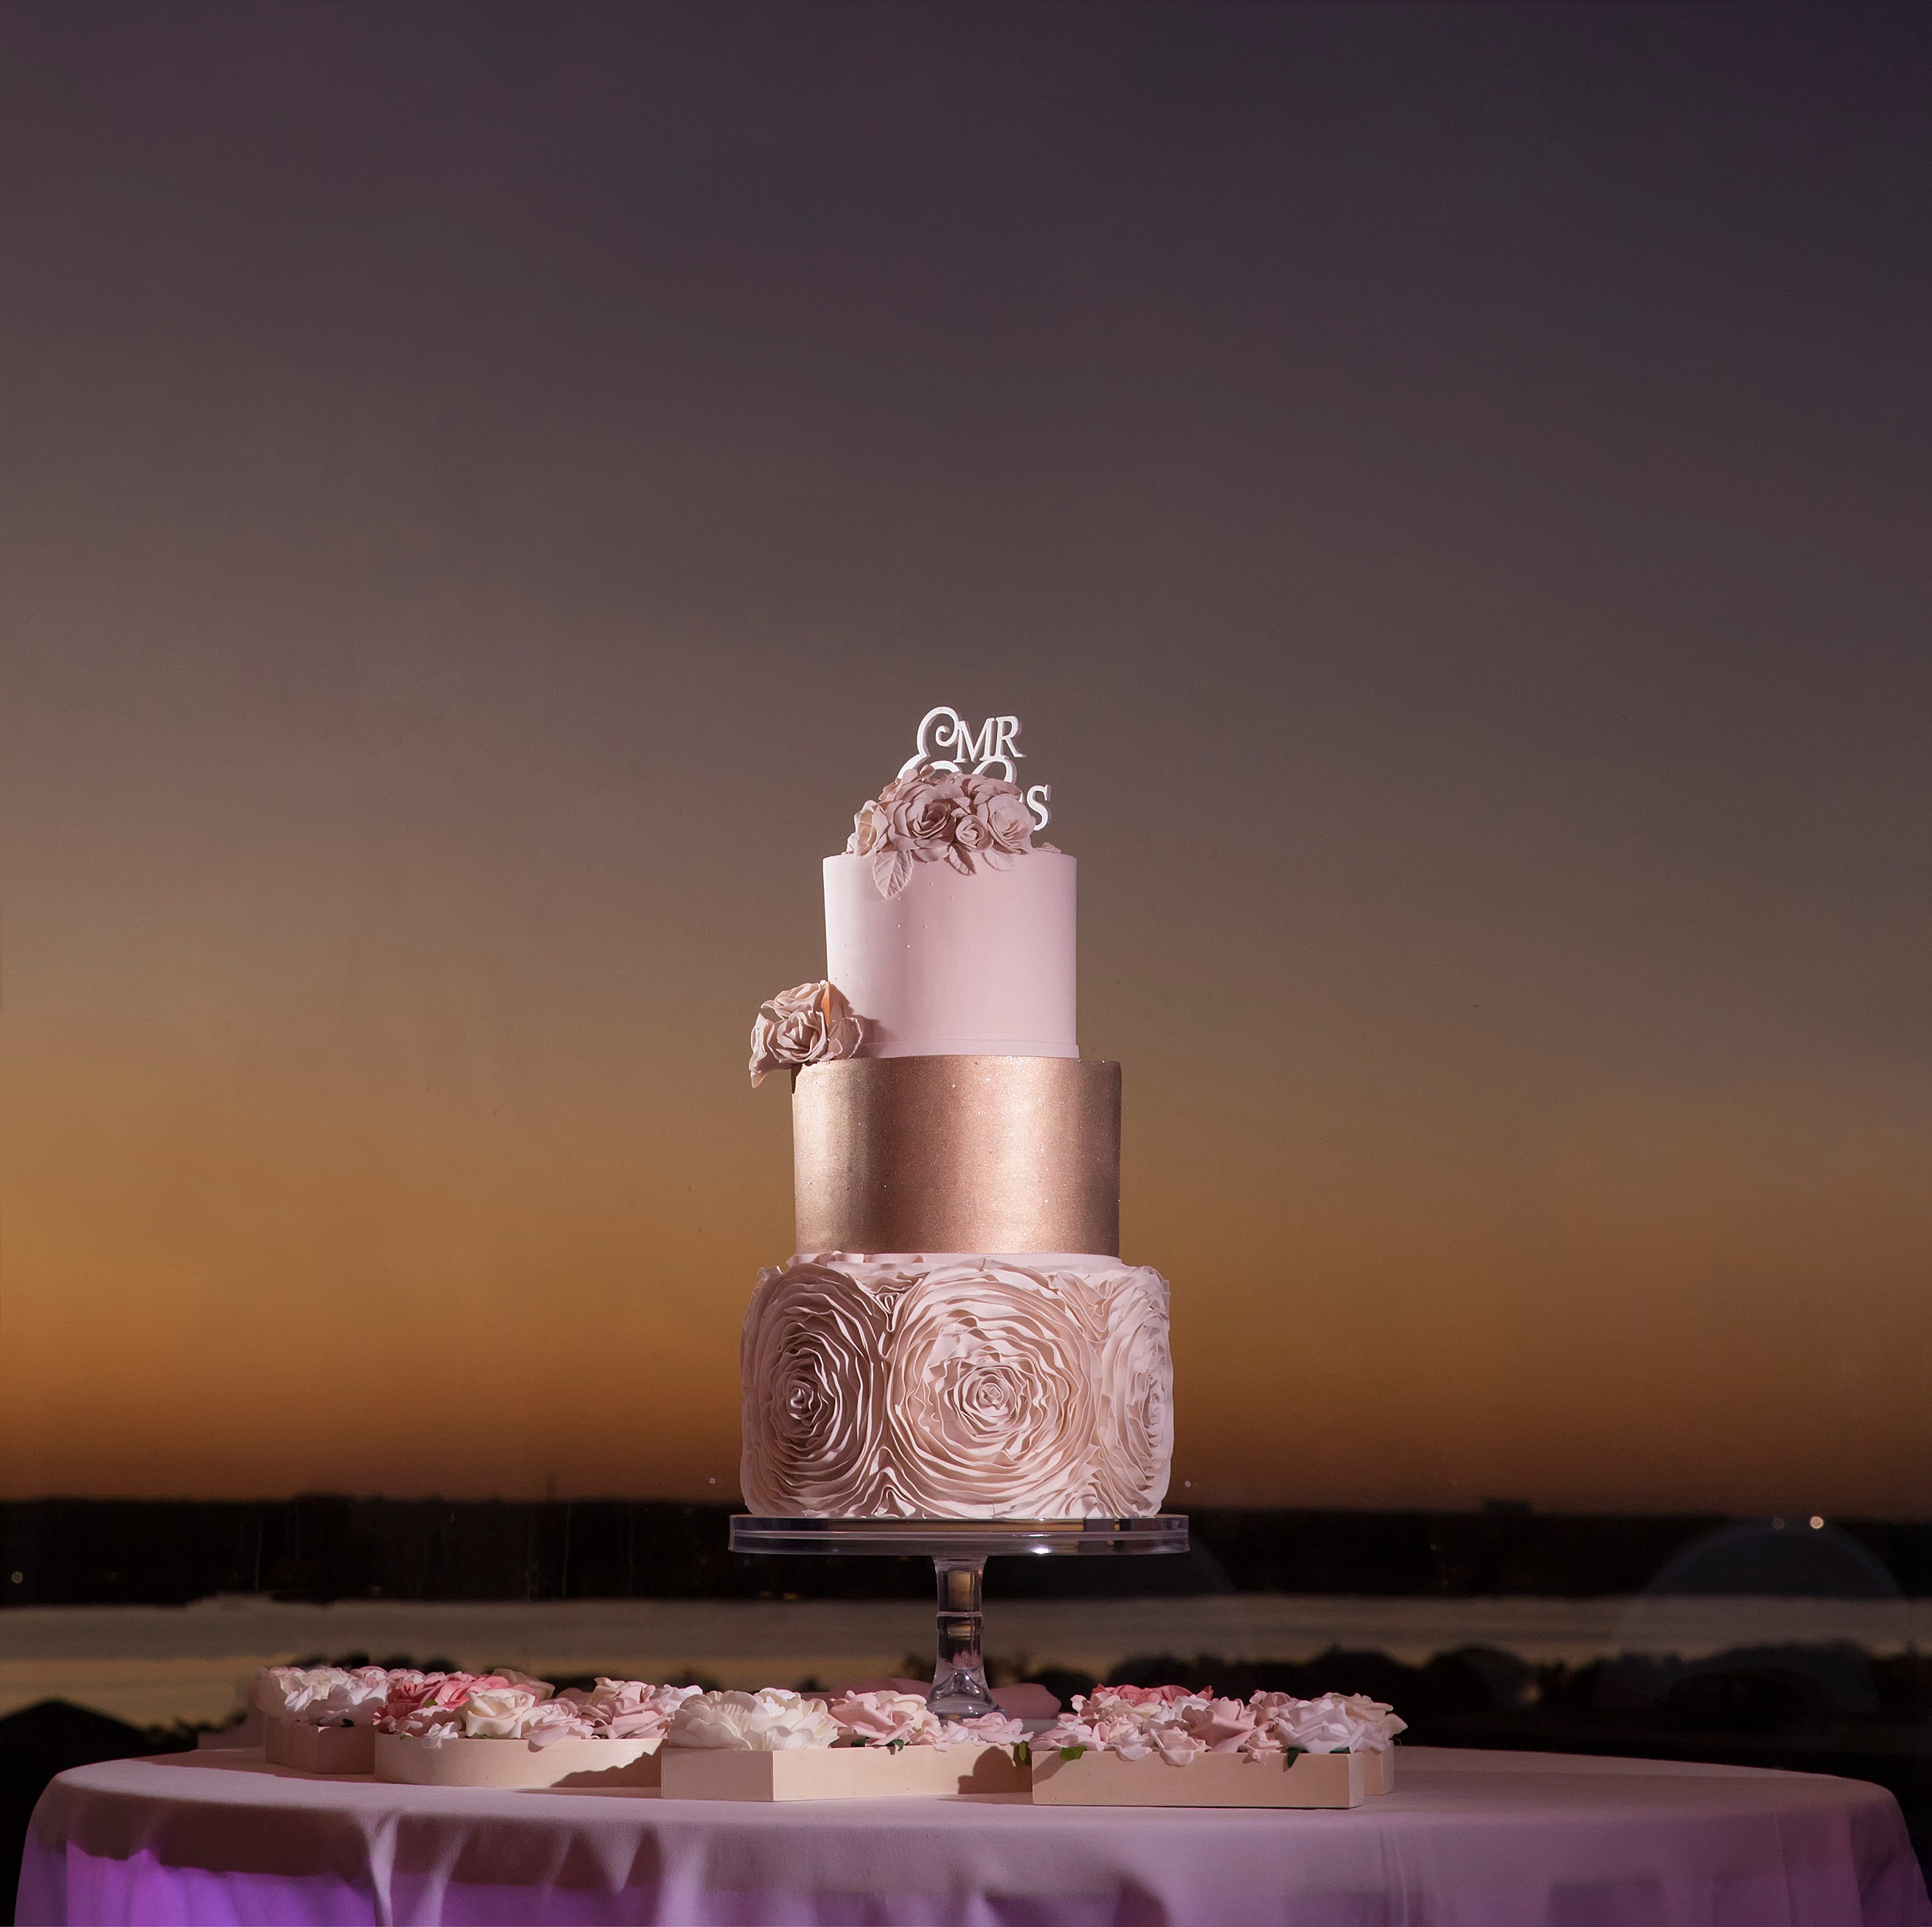 A three tier wedding cake sits on a beachfront patio table at sunset